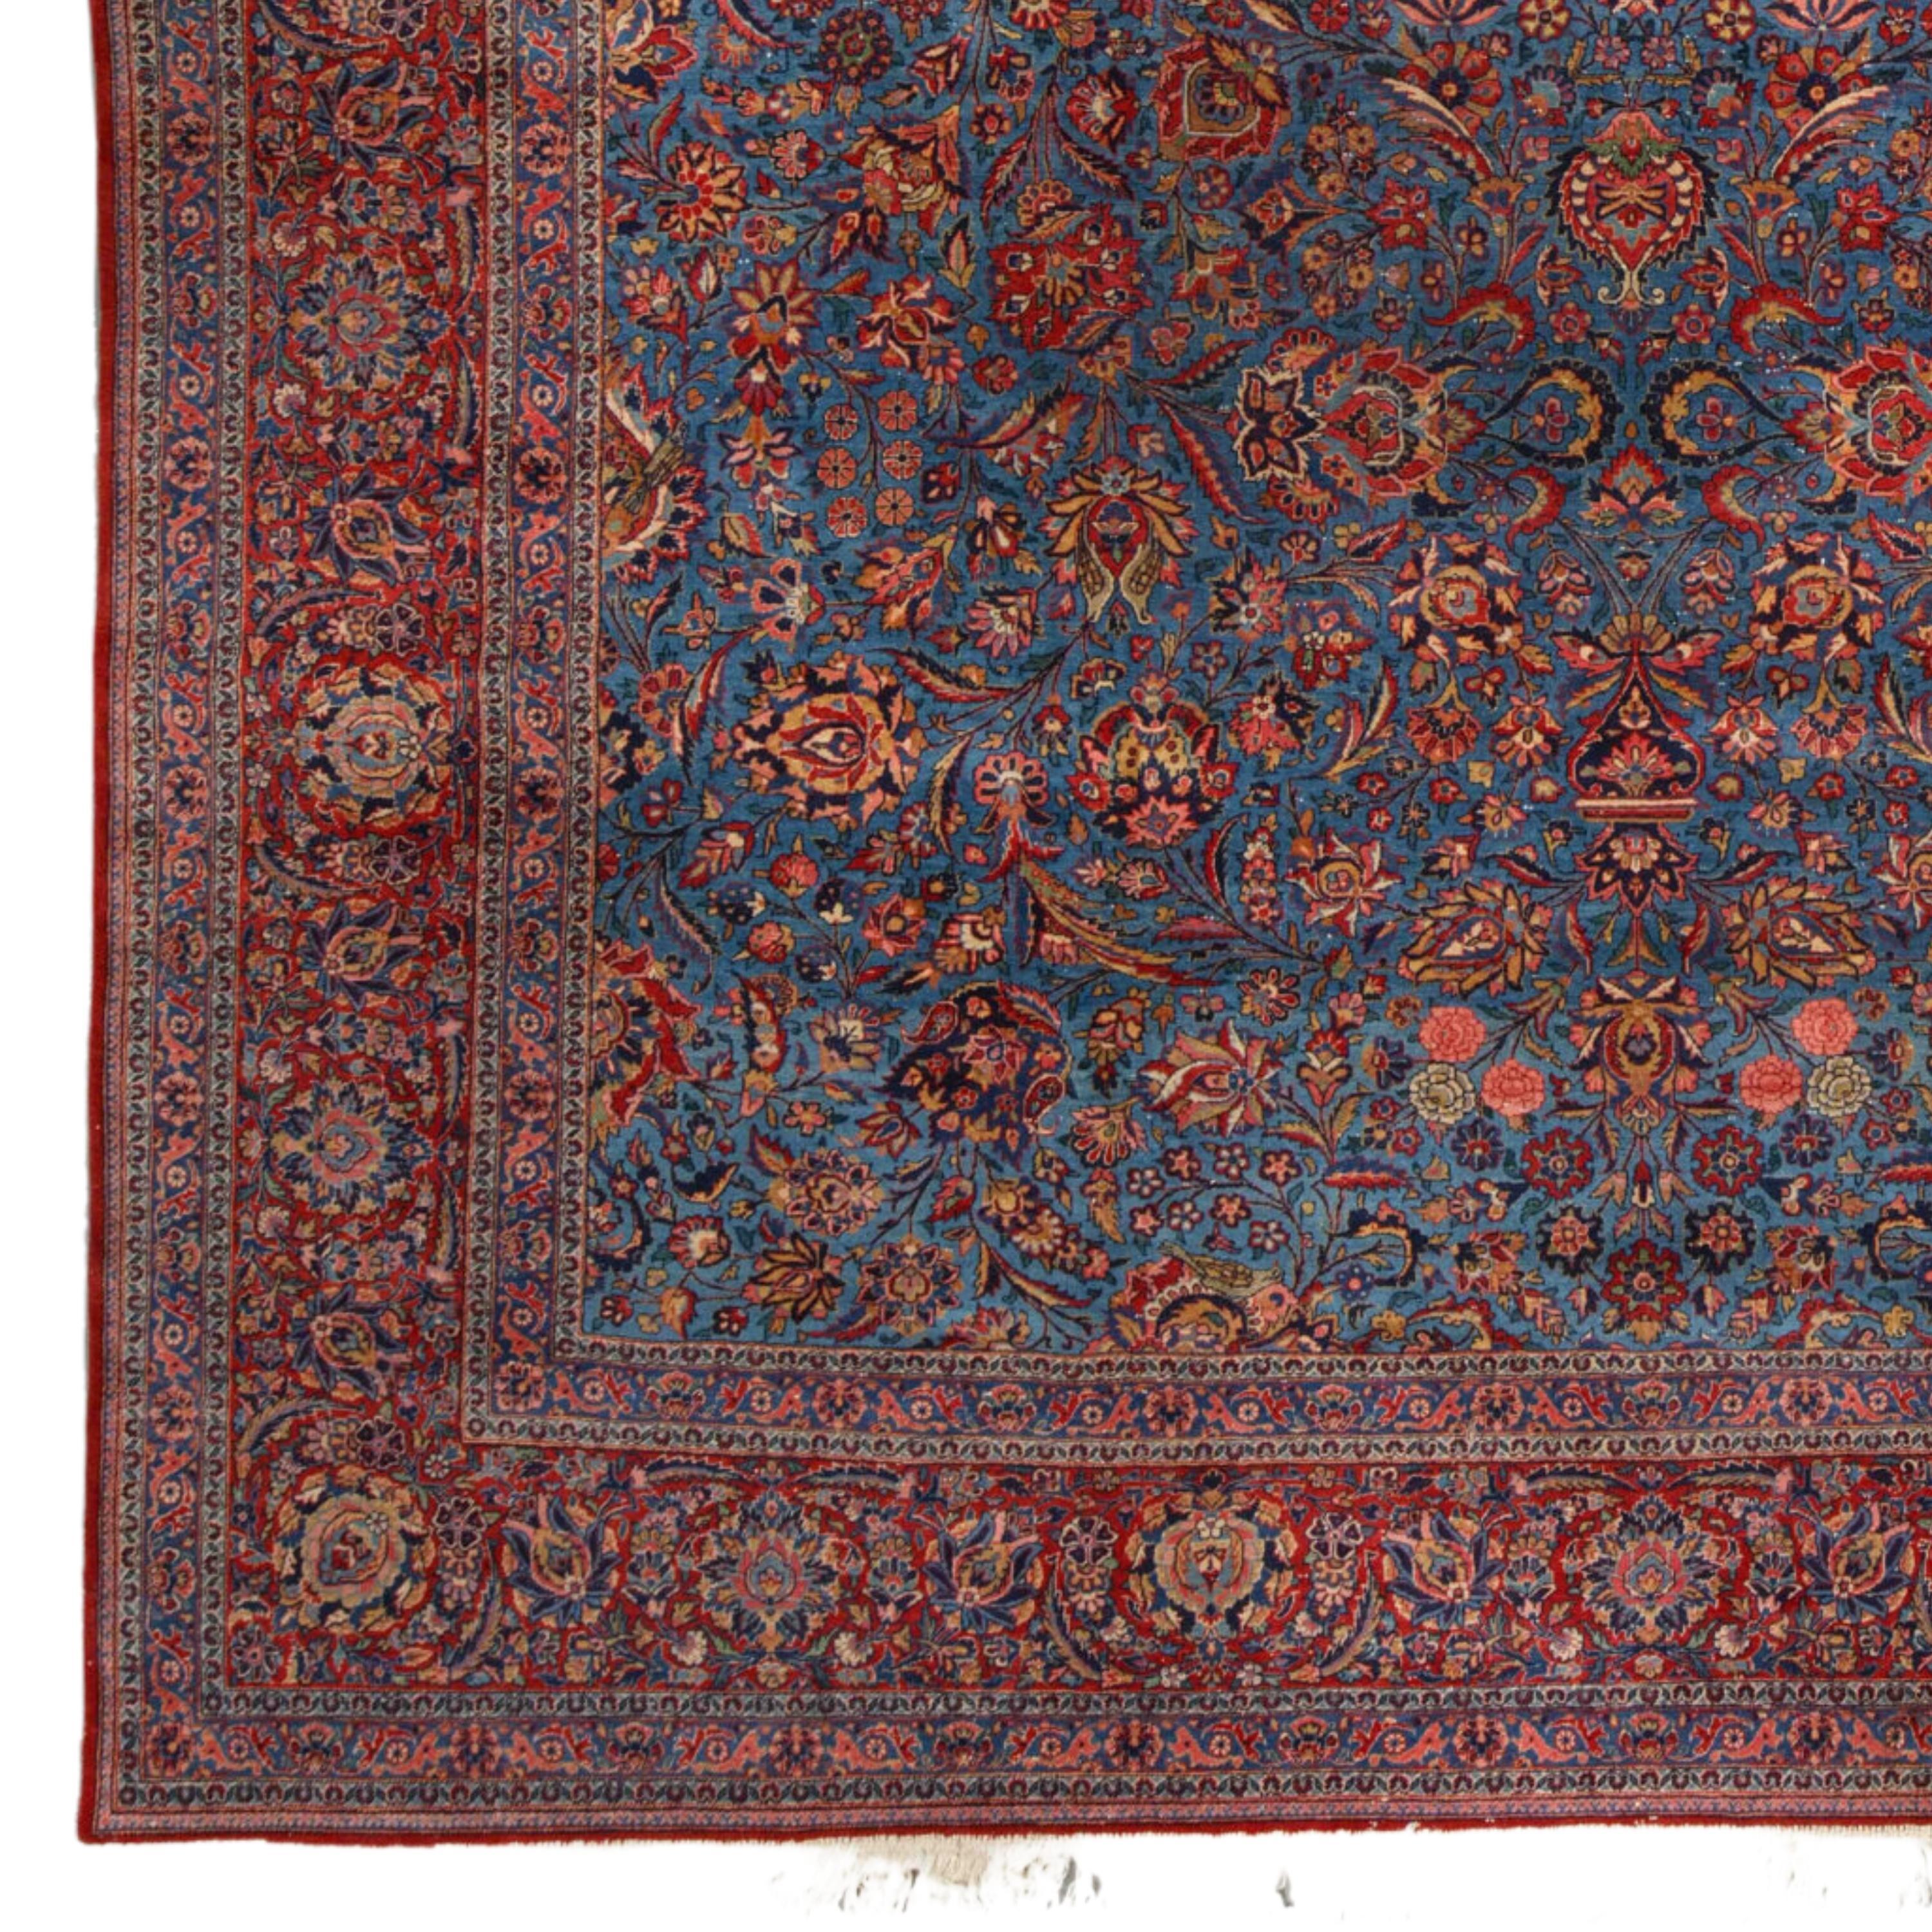 Antique Kashan Rug 310x445 cm (10,17x14,59 ft) Late 19th Century Kashan Rug

Nothing is known about Kashan carpets from the 17th to the 19th centuries, but at the dawn of the 20th century a large commercial production of pile carpets of both wool